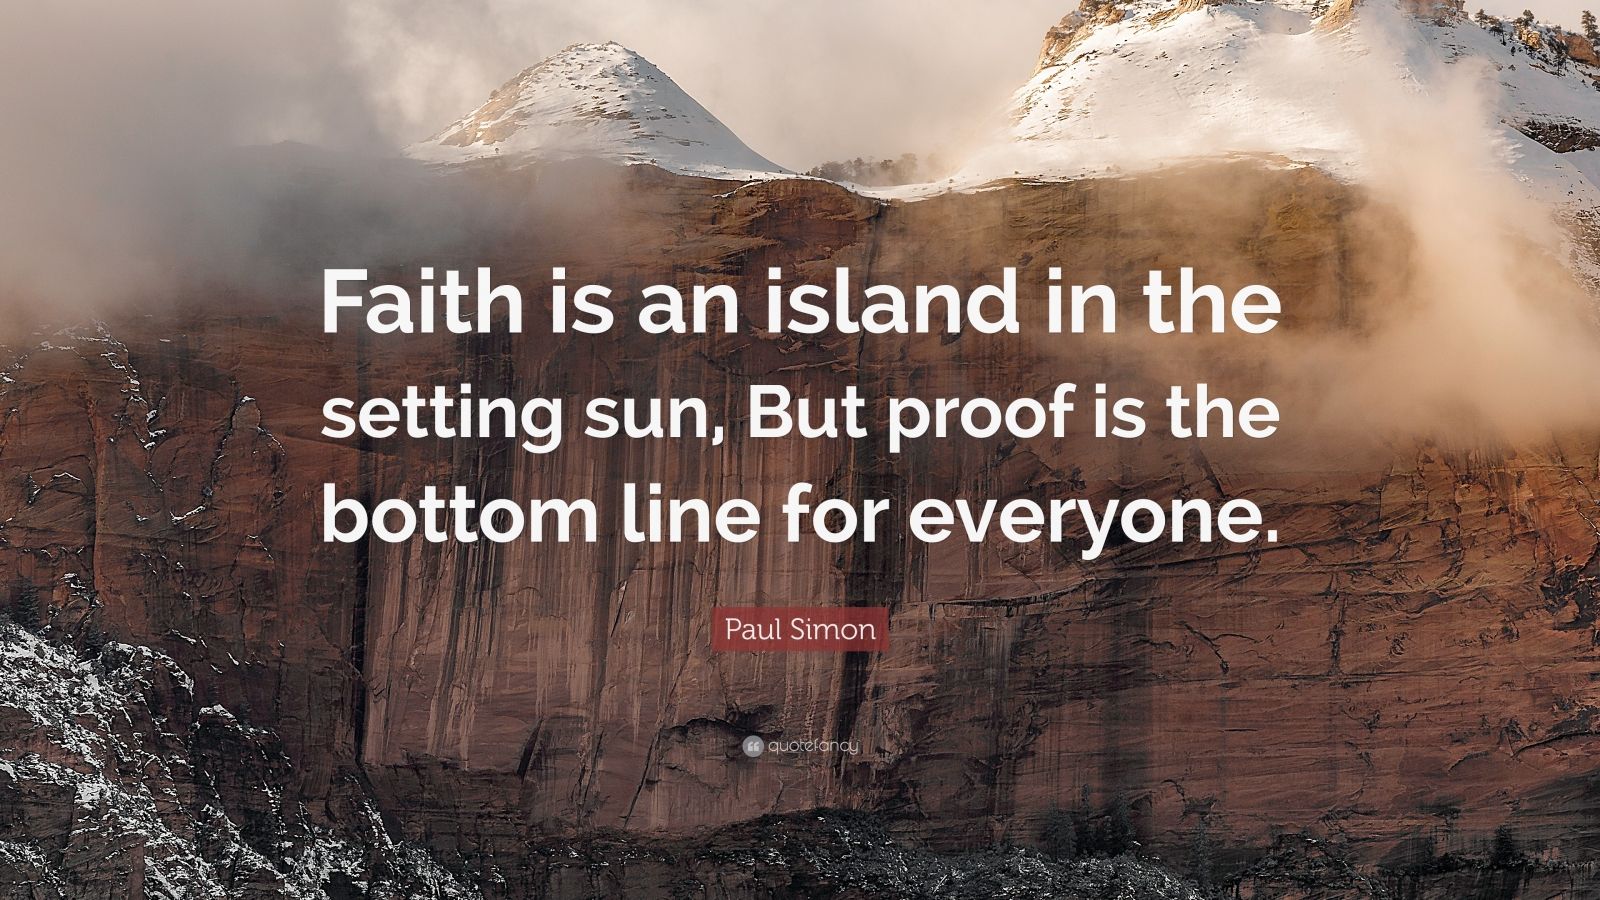 Paul Simon Quote: "Faith is an island in the setting sun, But proof is the bottom line for ...